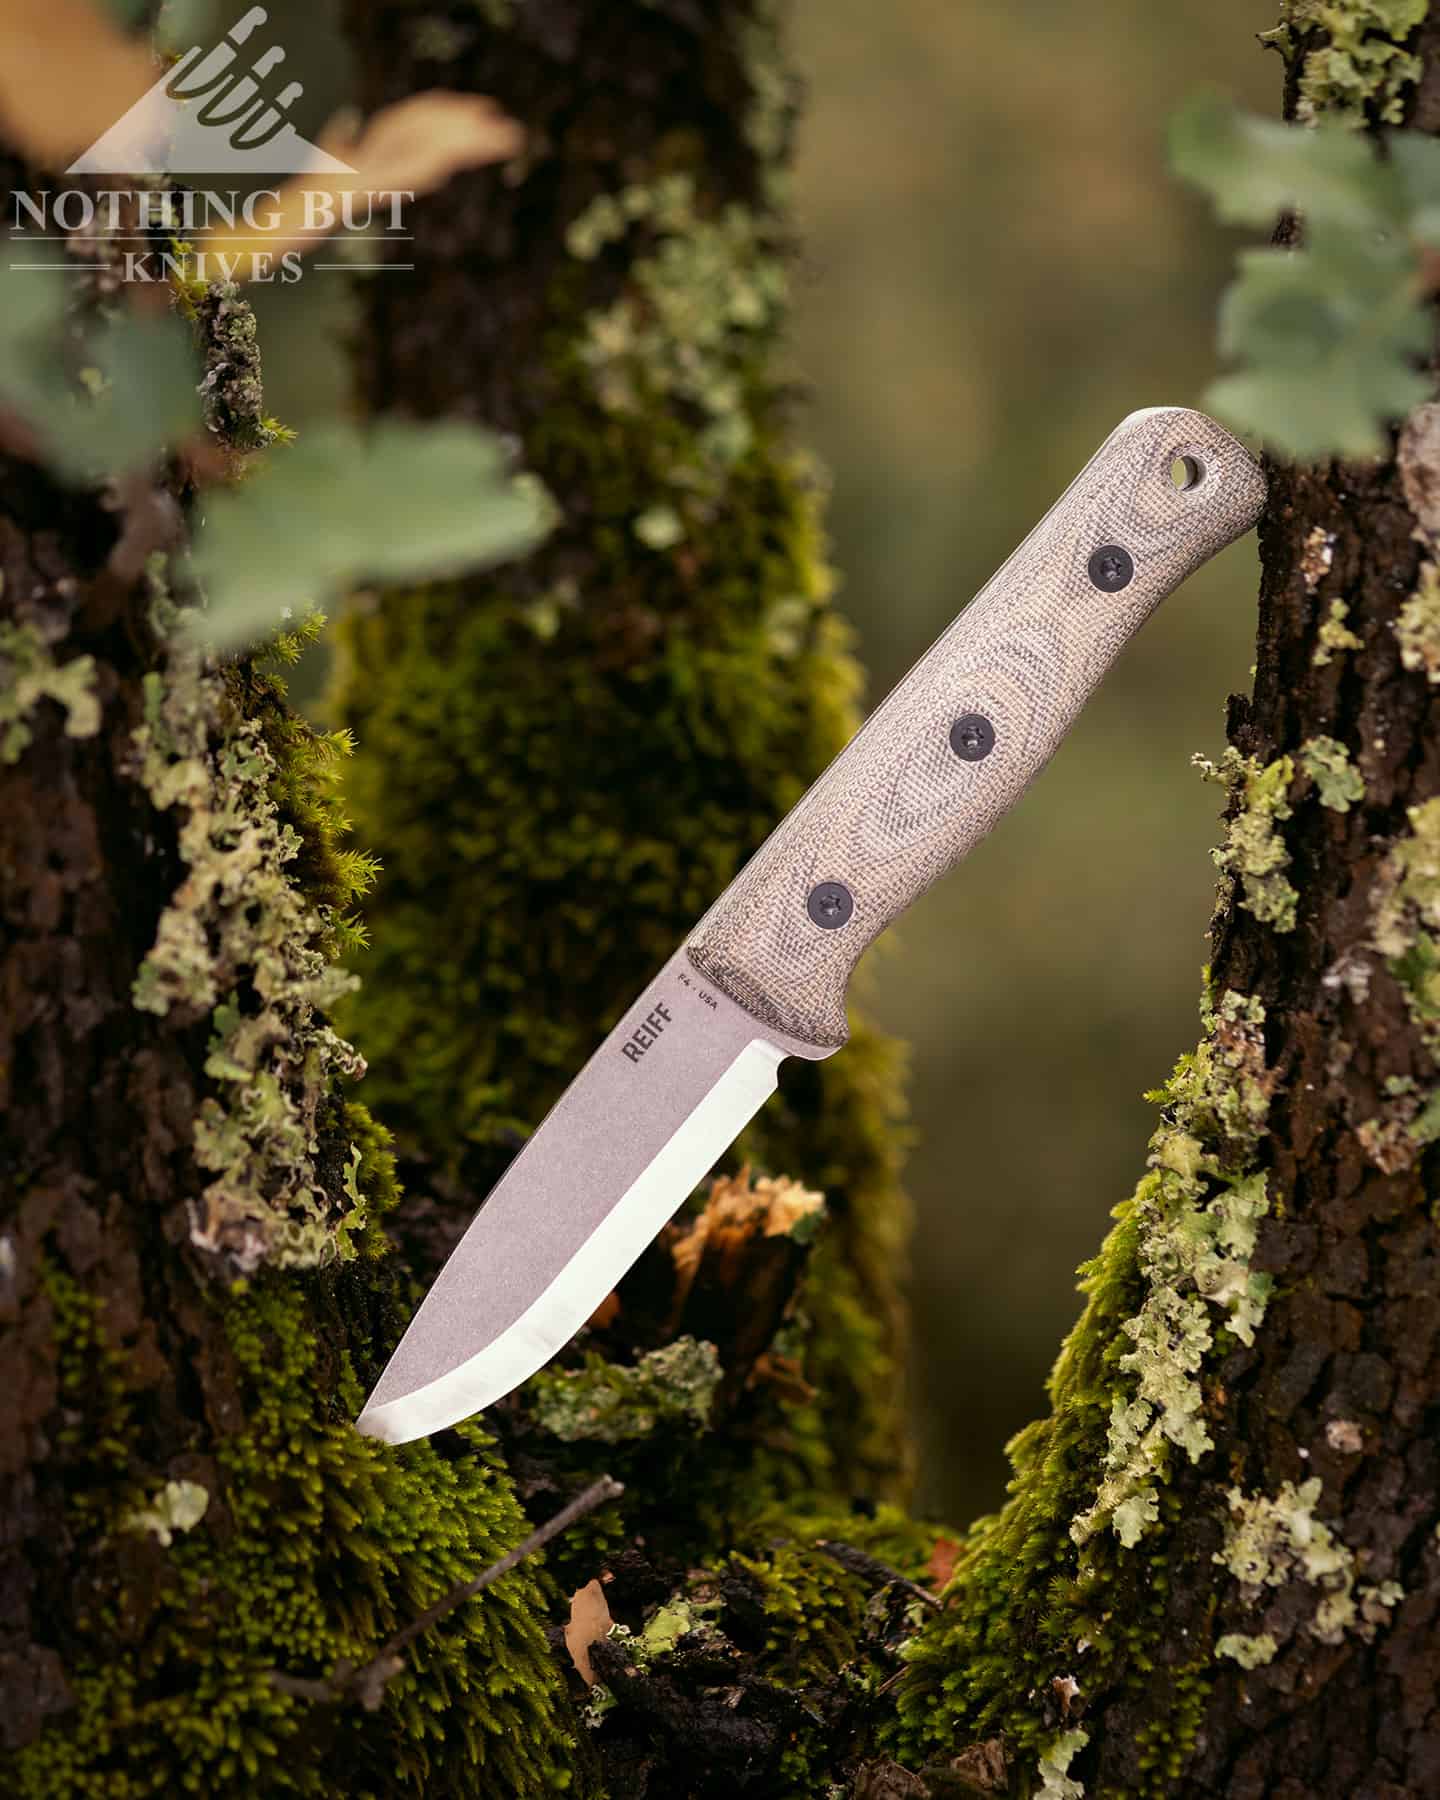 The Reiff F4 Scandi may be the all-around best bushcraft knife we have ever tested. 